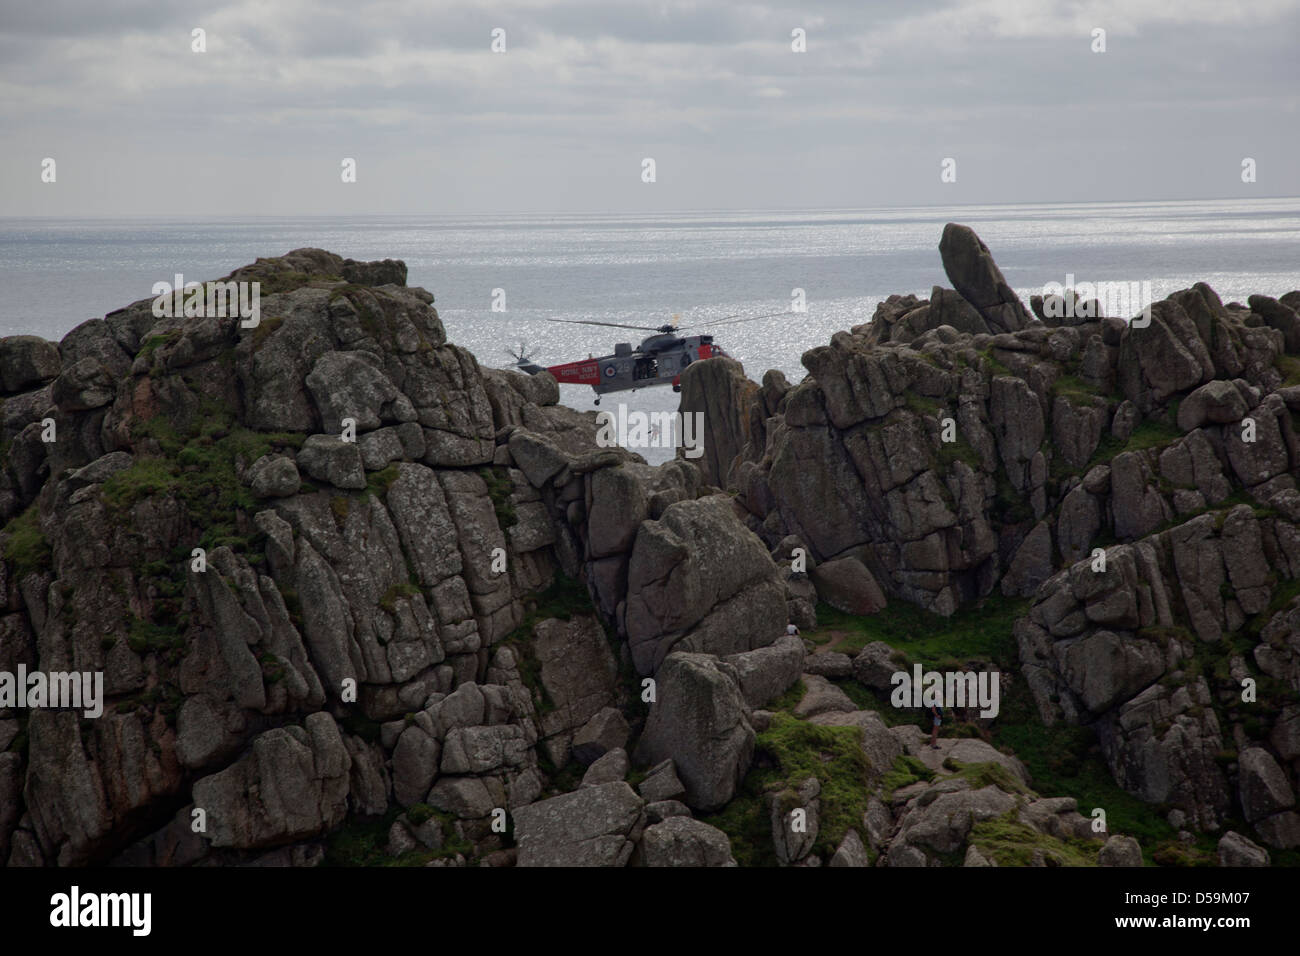 RAF Air Sea Rescue Sea King helicopter in action at Logan Rock, Penzance, Cornwall, UK Stock Photo